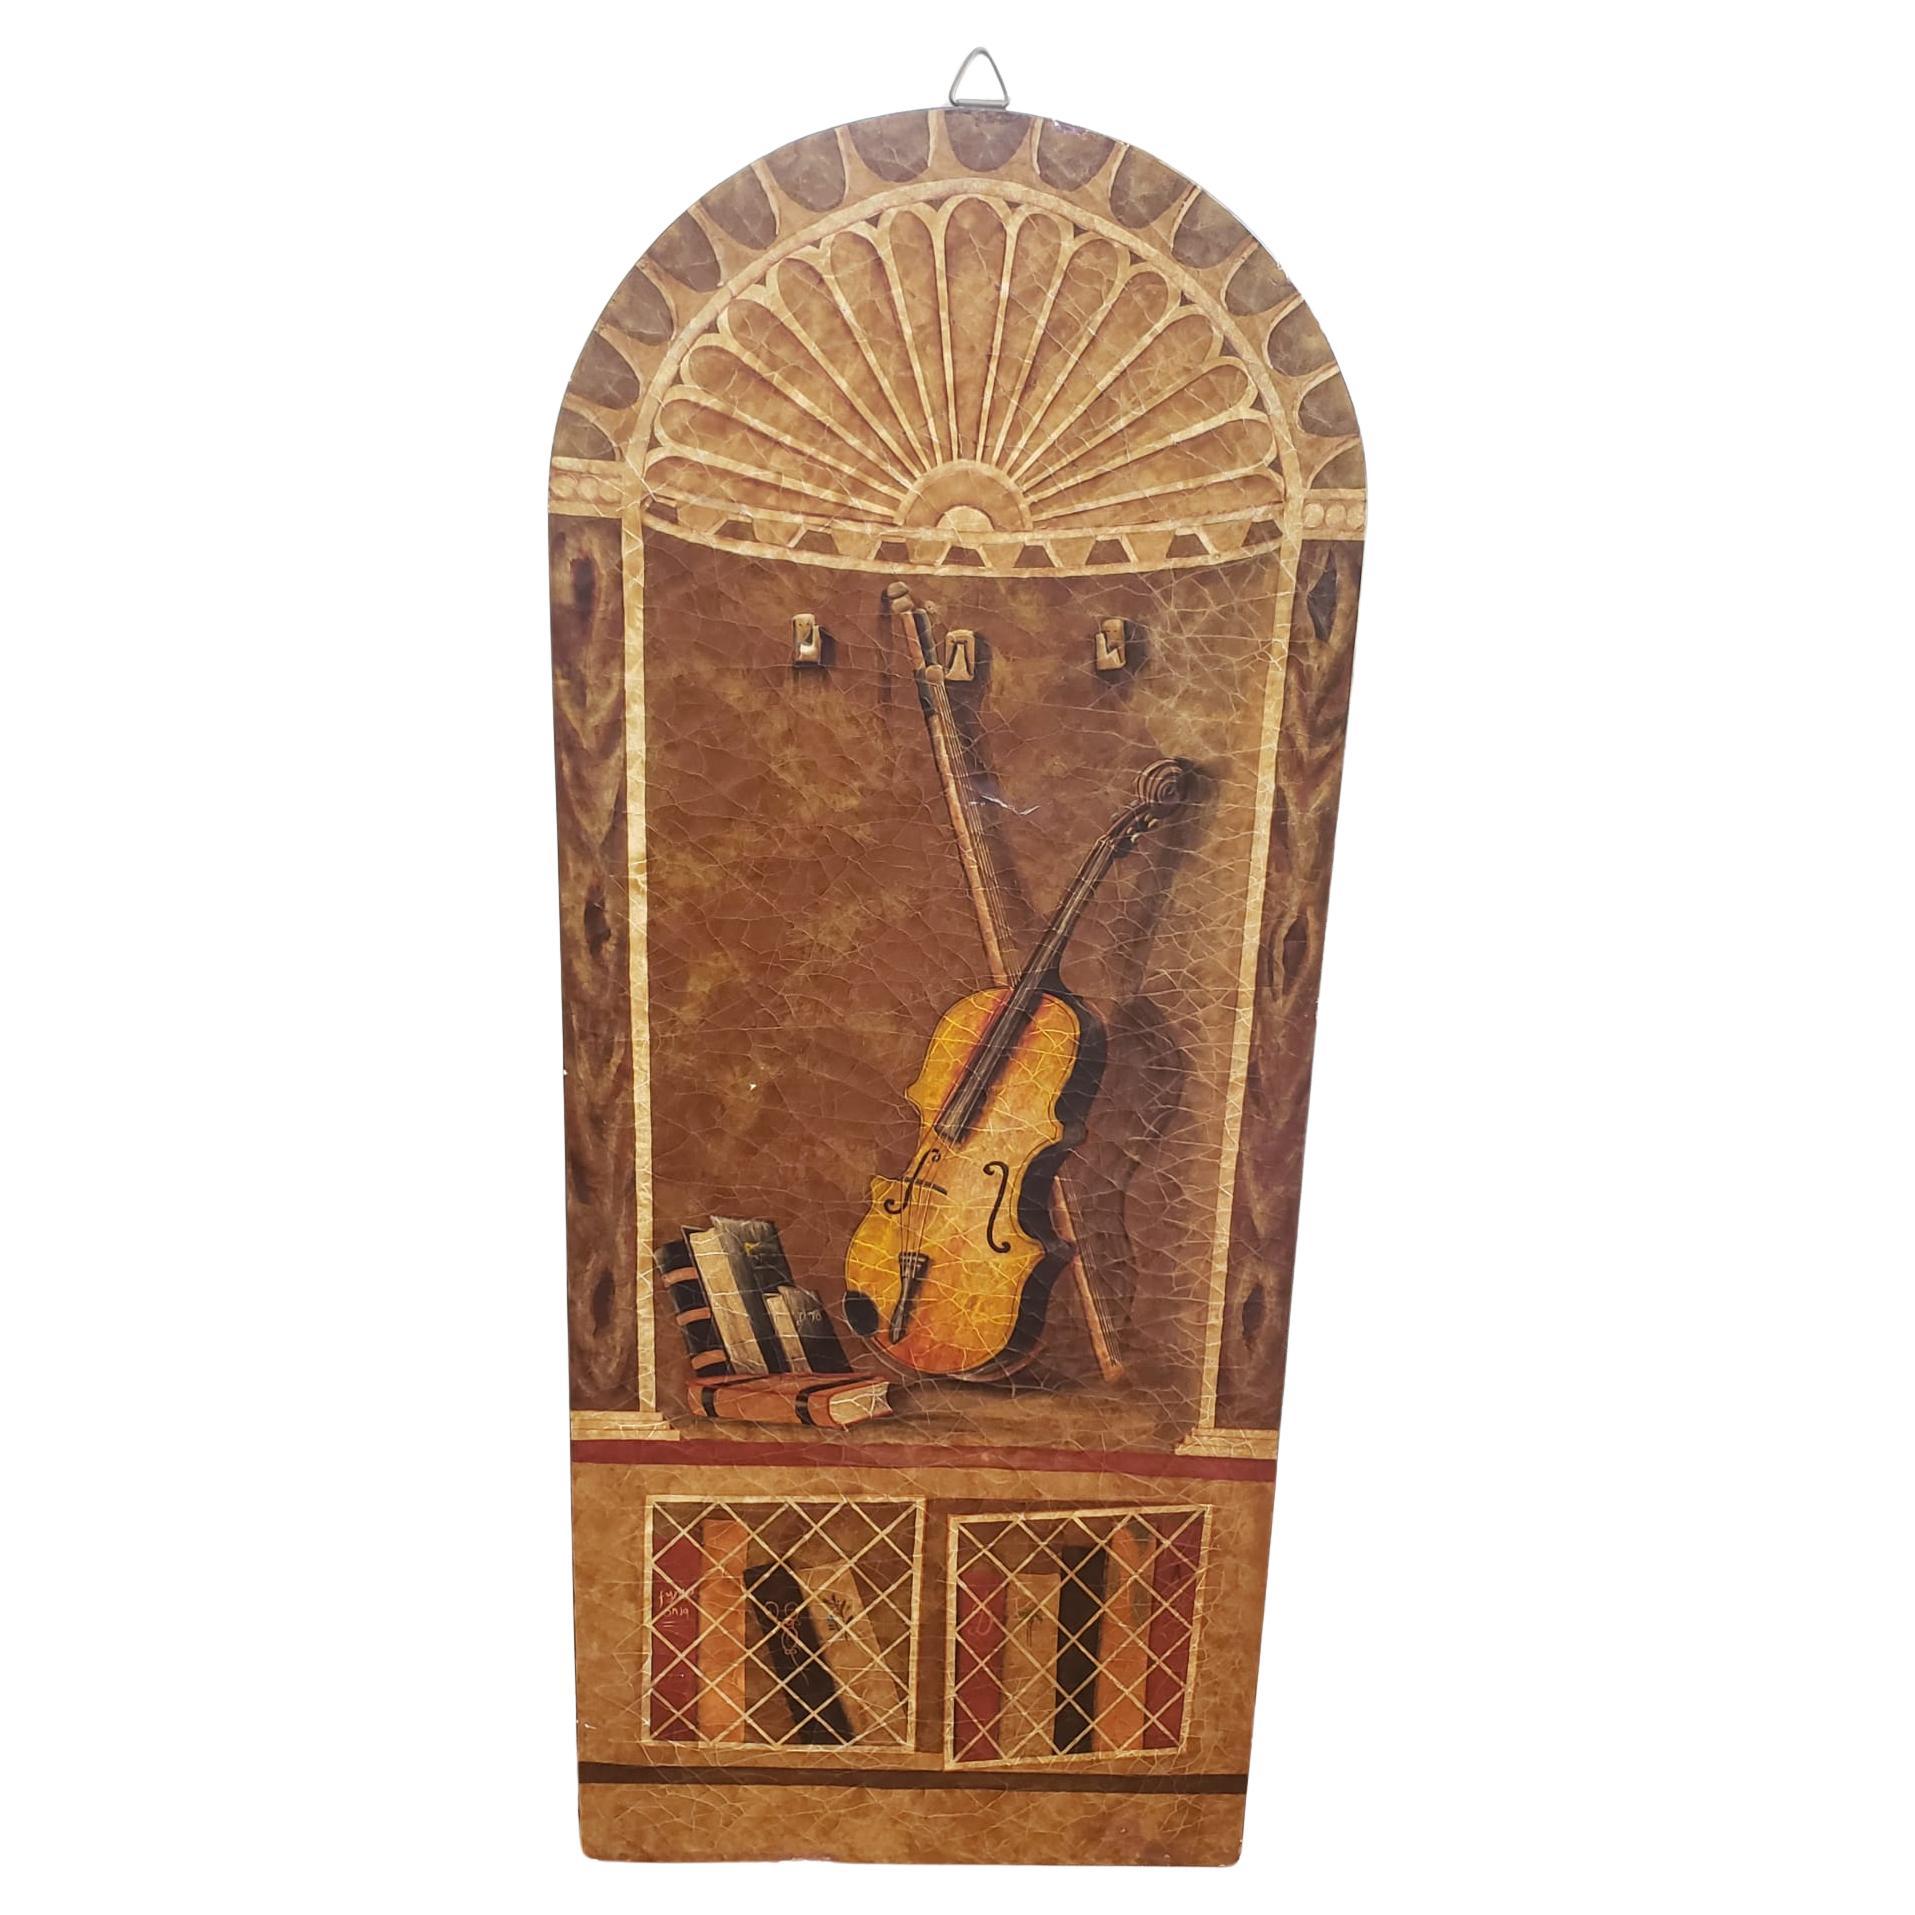 A contemporary richly Decorative Crackle Painted Wood Hanging Wall Panel in great vintage condition. Measures 22